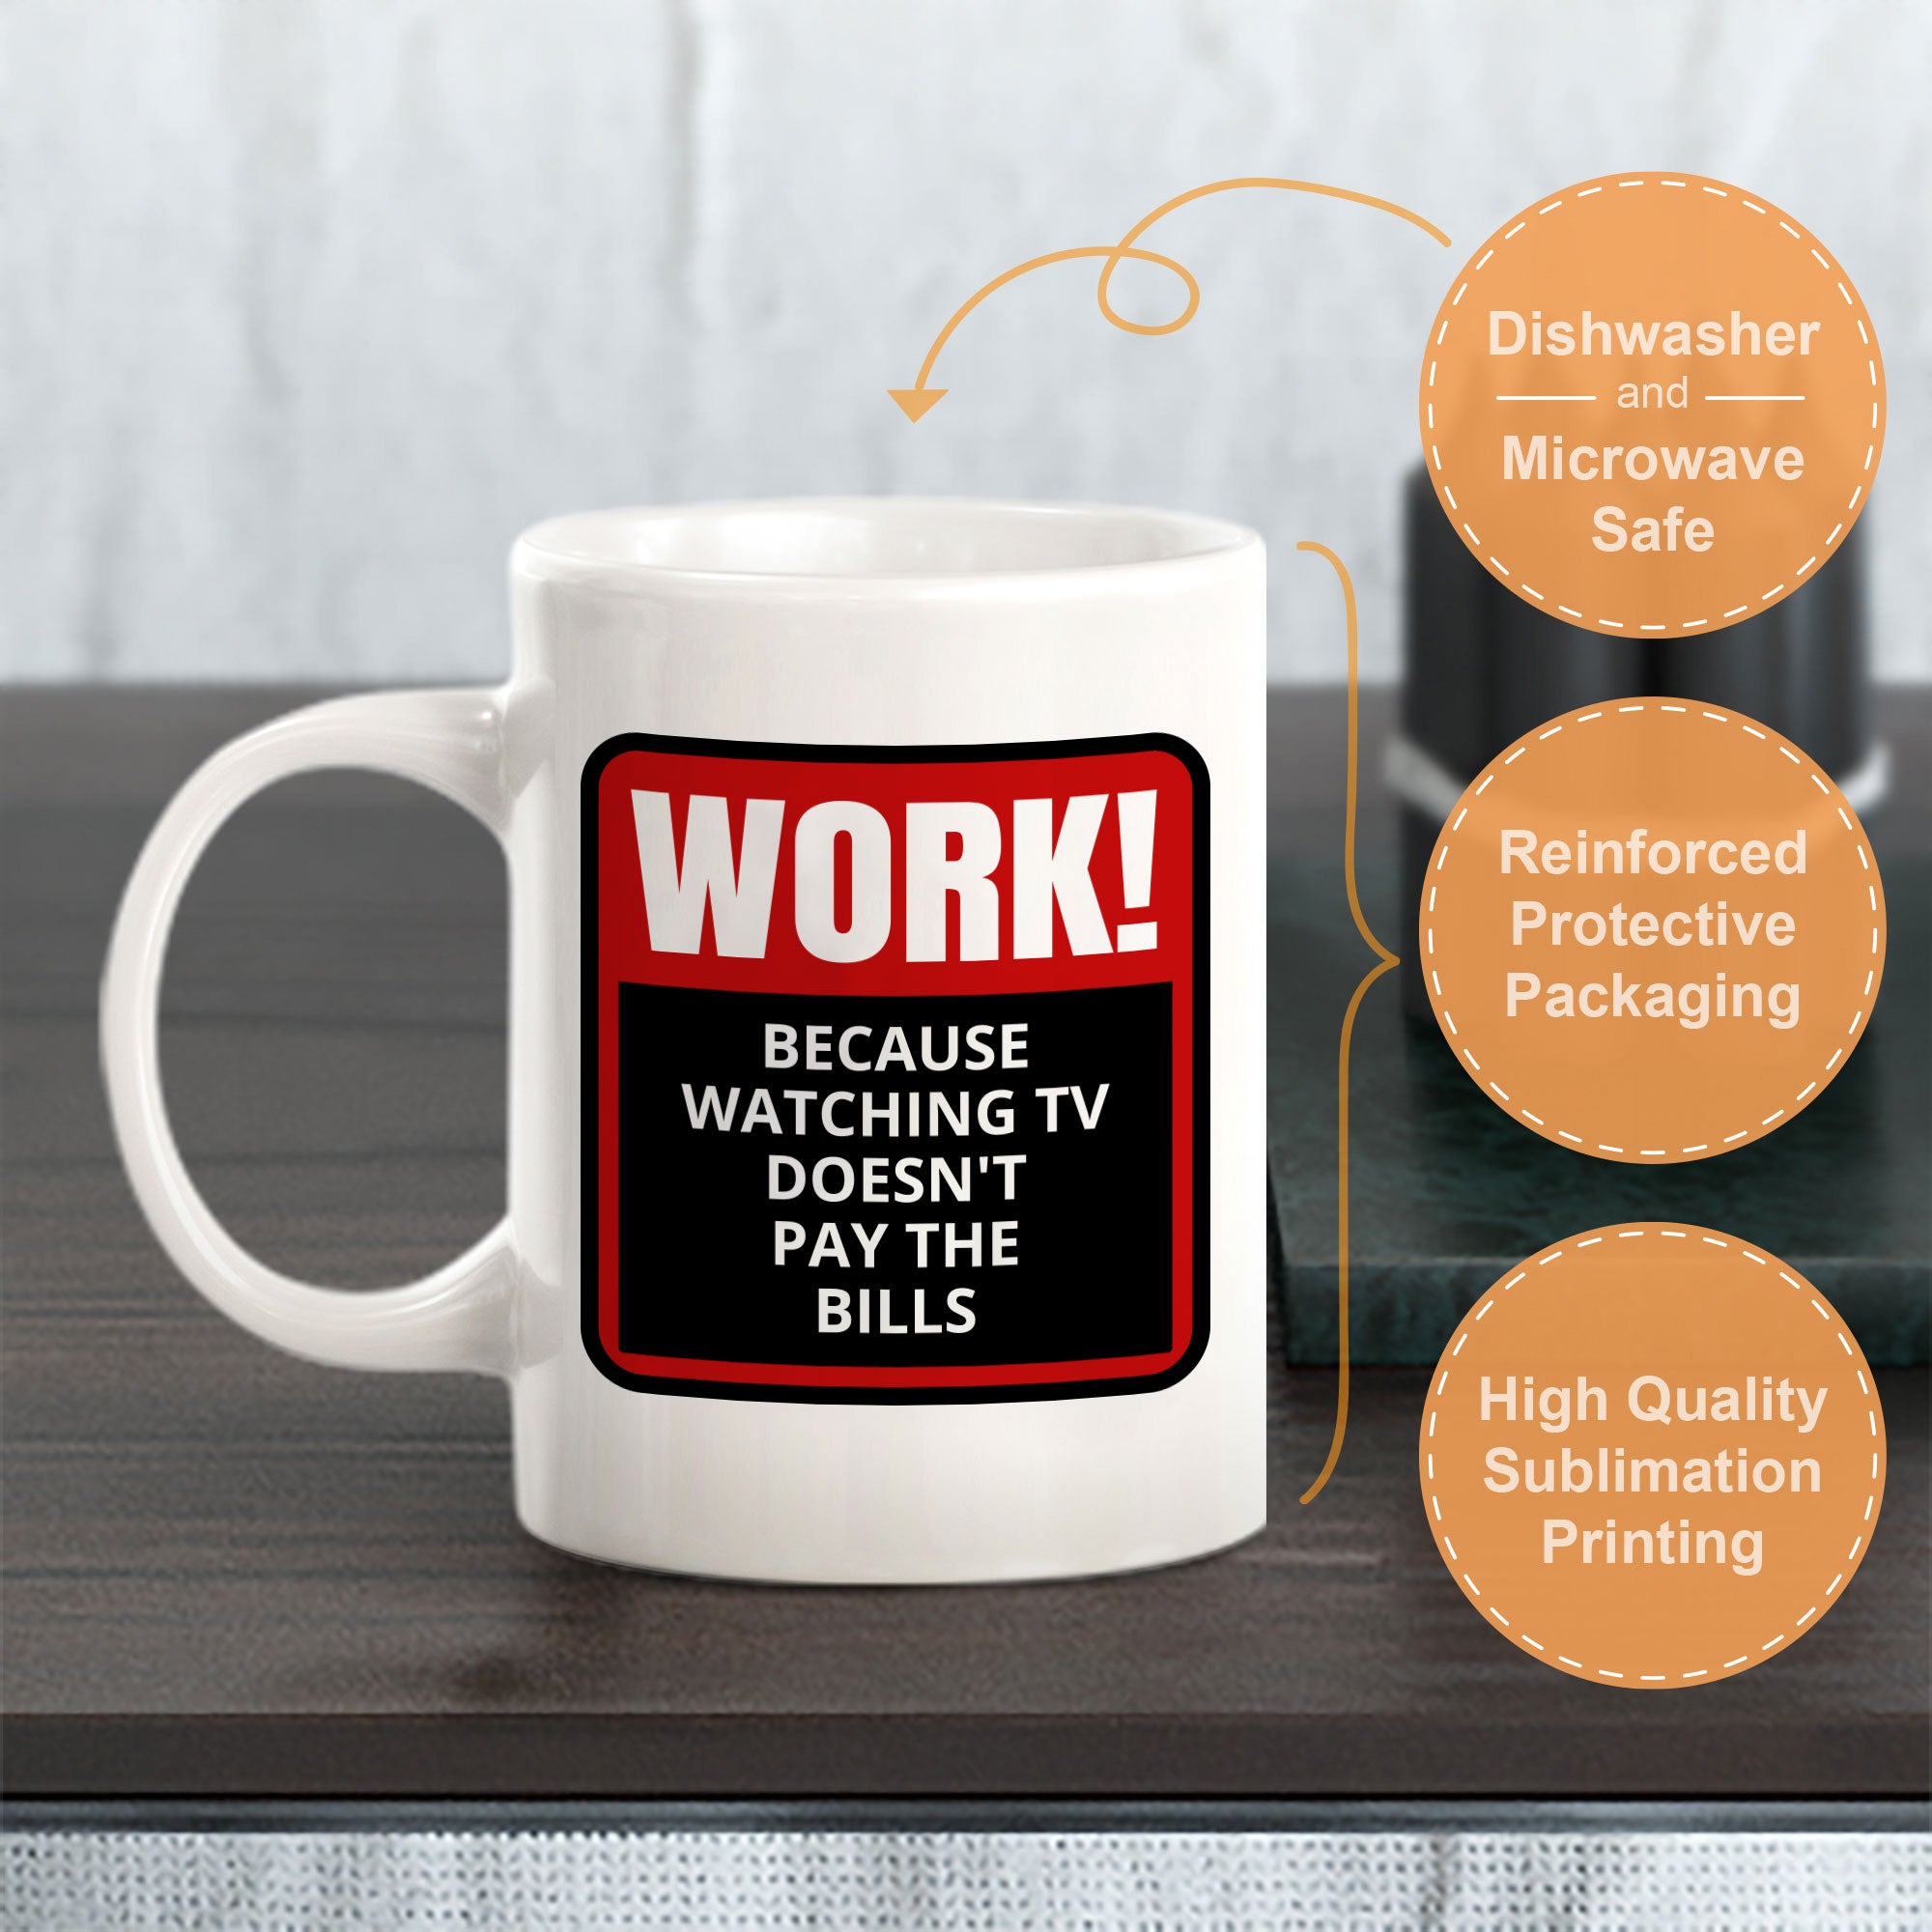 Work! Because Watching TV Doesn't Pay The Bills 11oz Plastic or Ceramic Mug | Funny Novelty Coffee Lover Cup